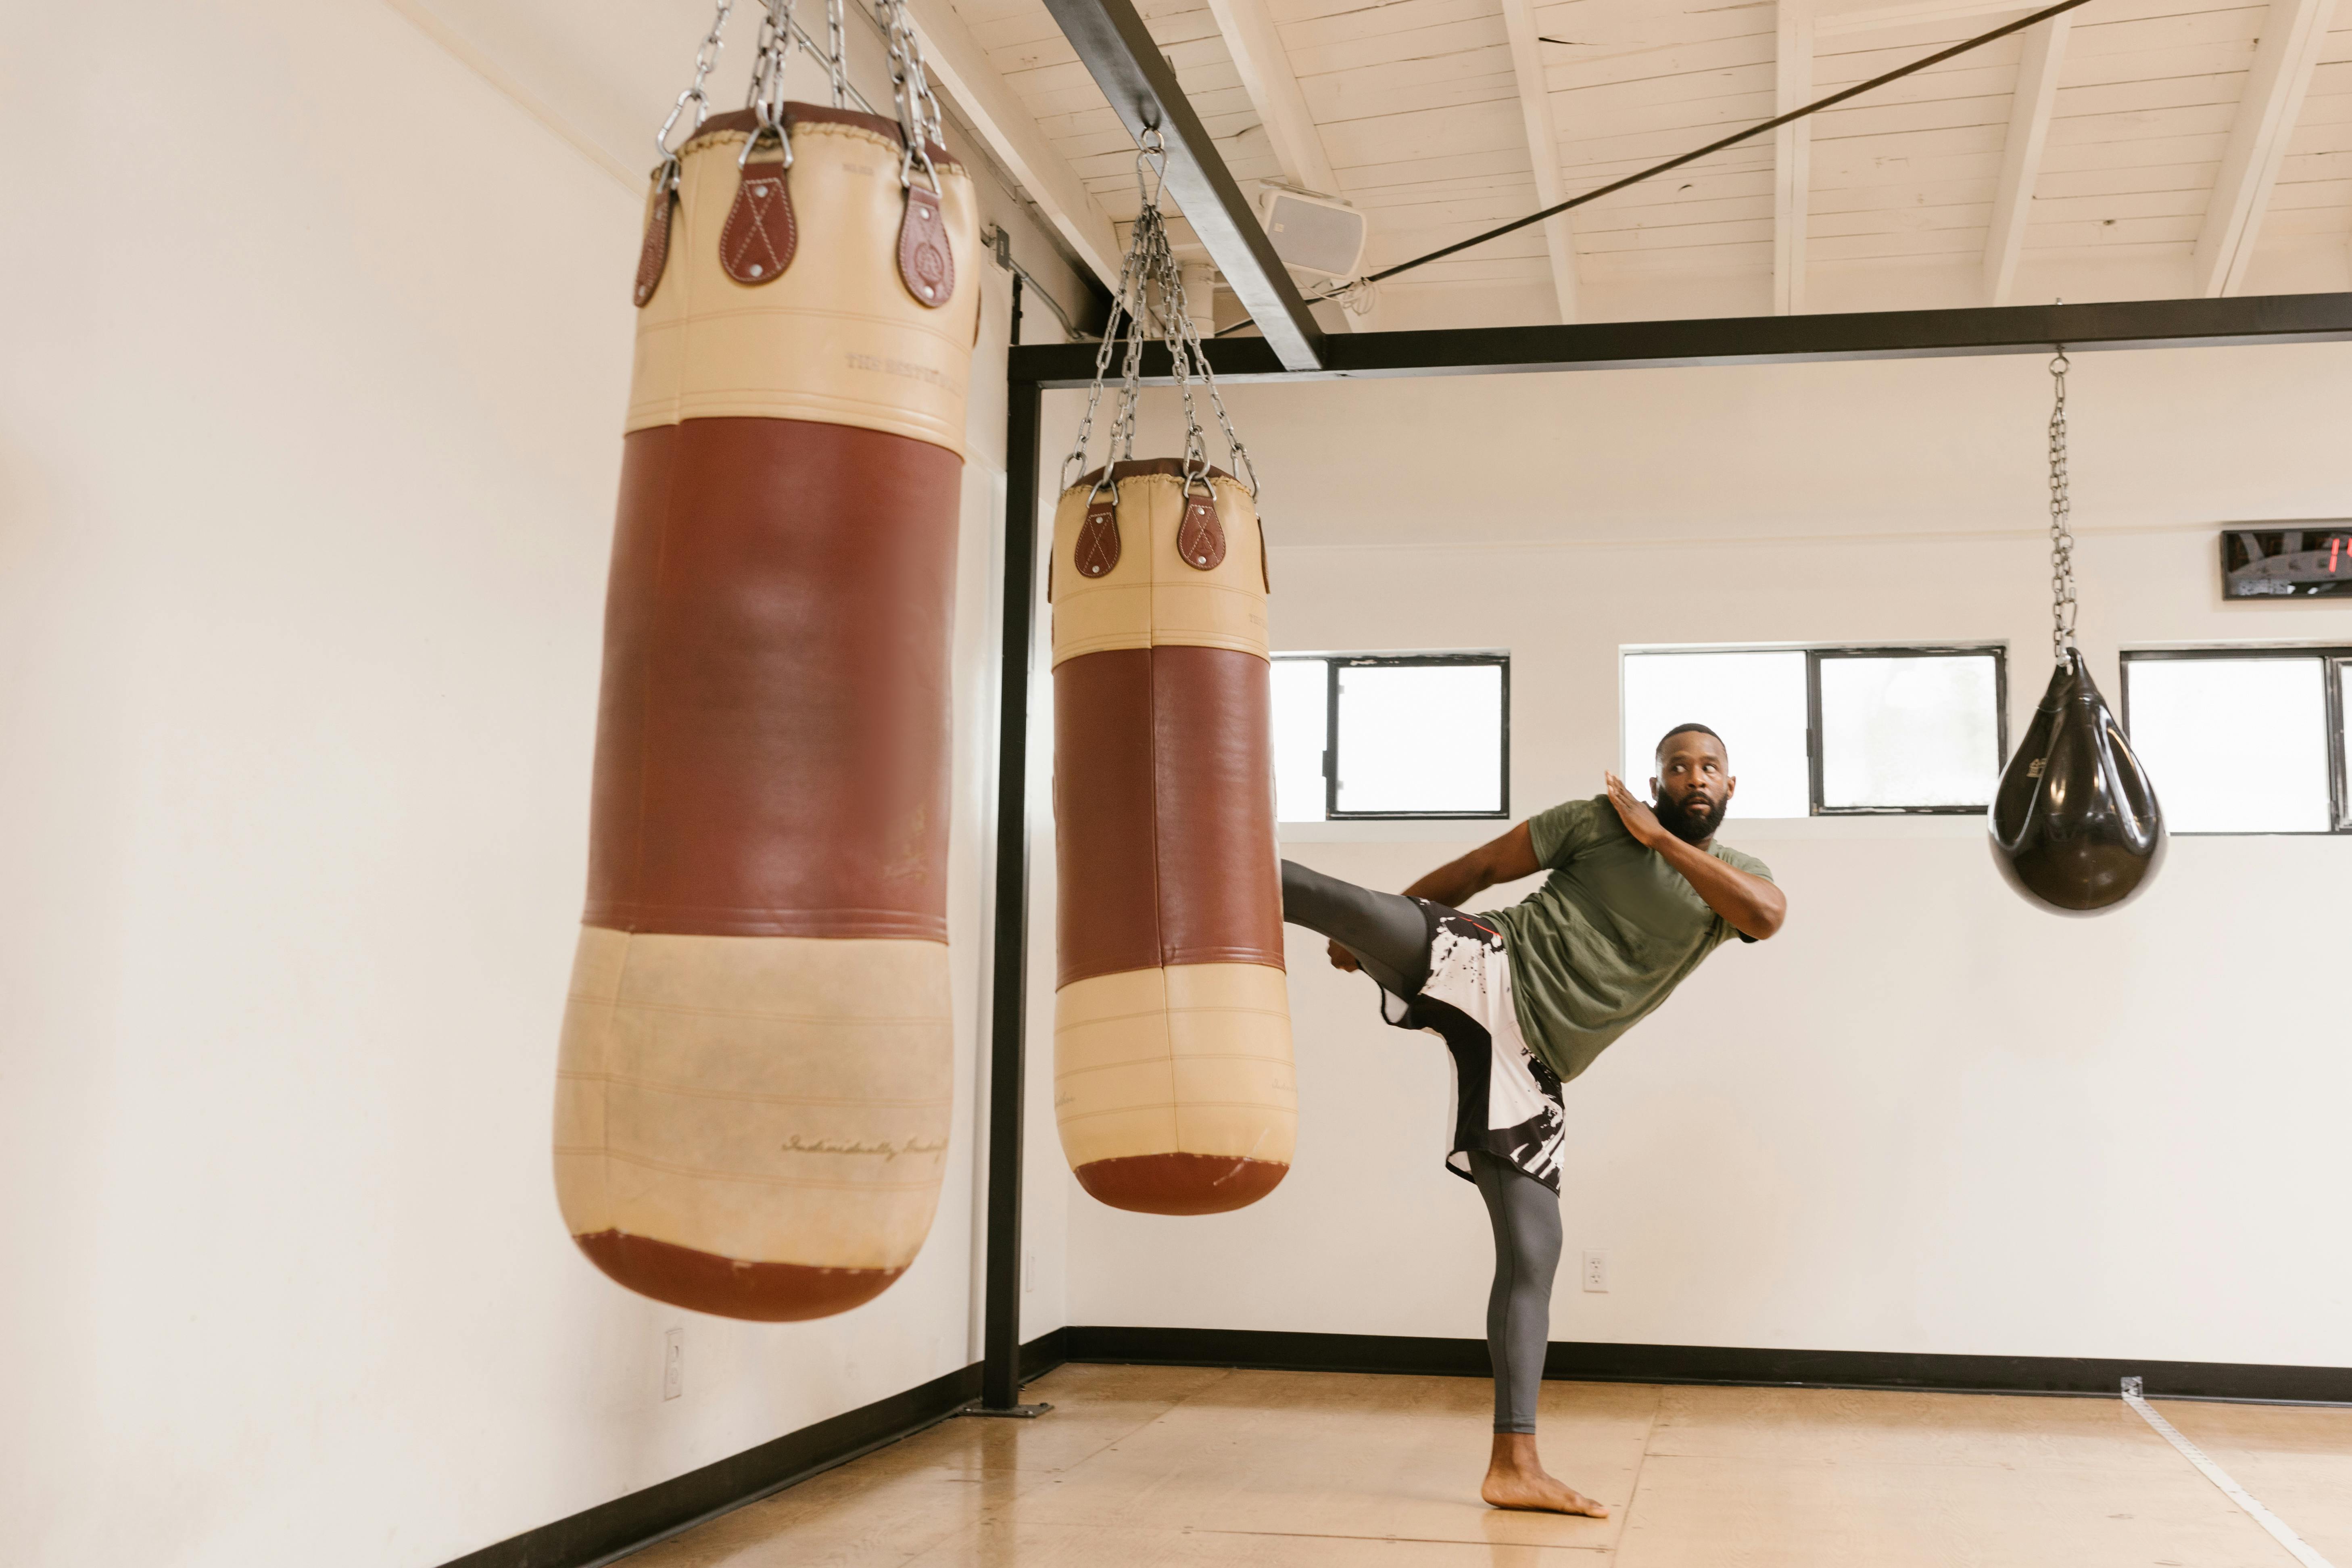 Boxing Bag Pictures | Download Free Images on Unsplash